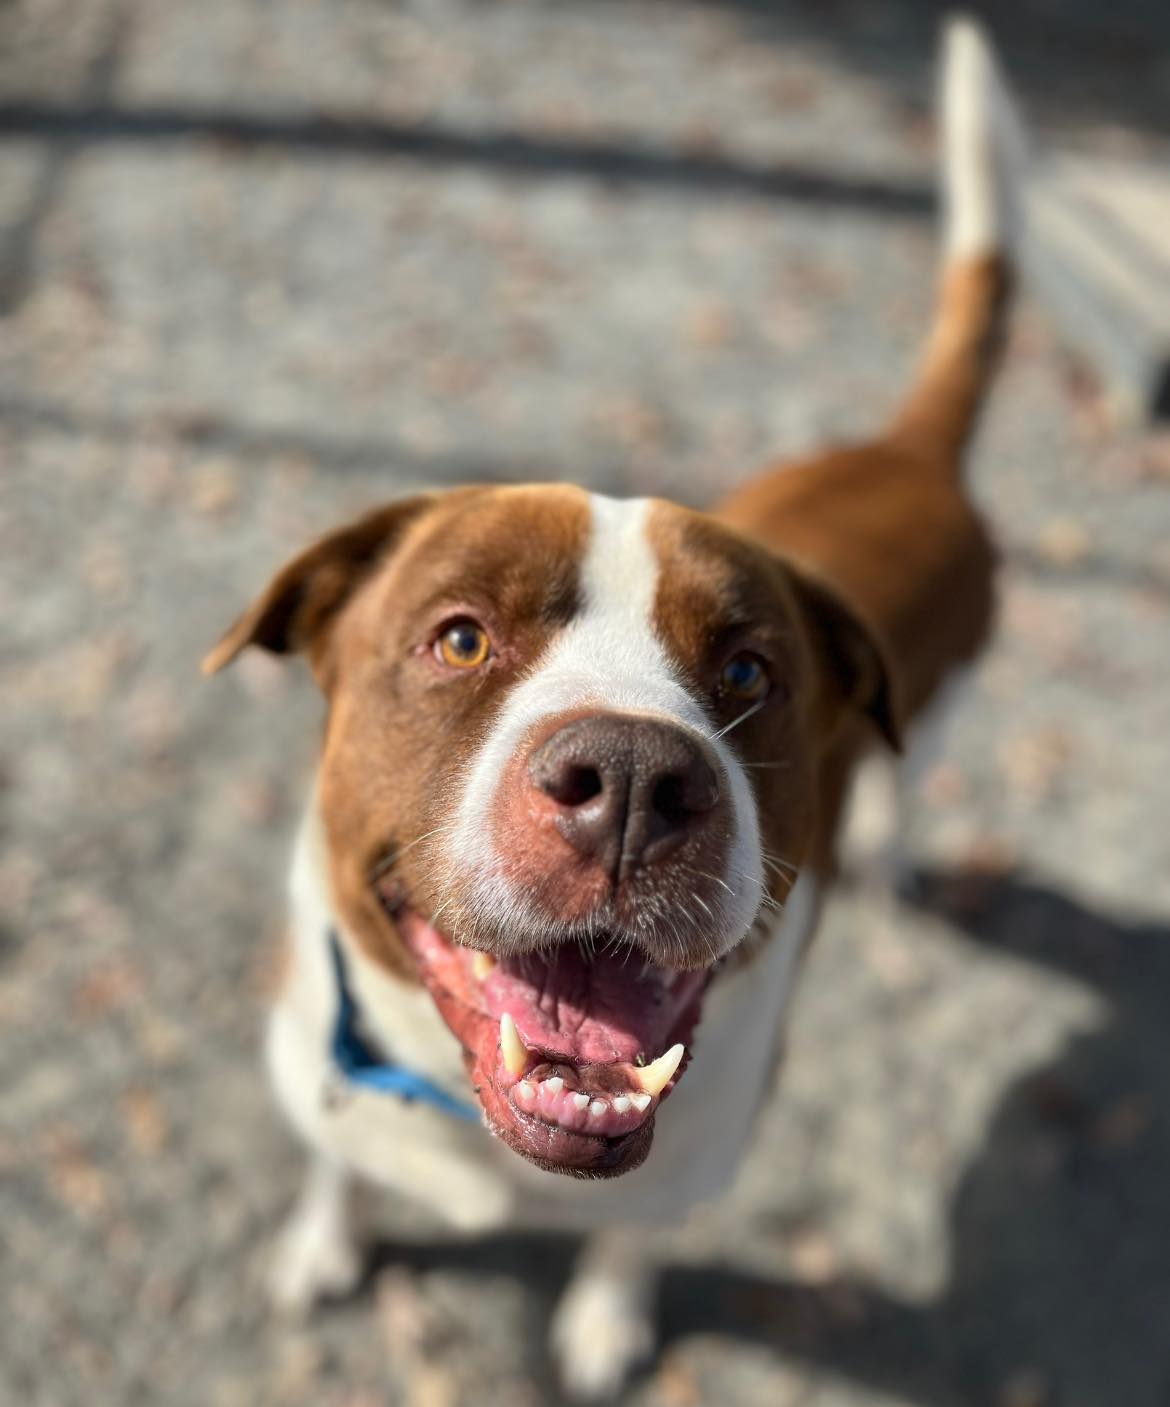 A copper and white dog looks happily at the camera. His mouth is open in a relaxed manner. HIs tail, out of focus, can be seen wagging.